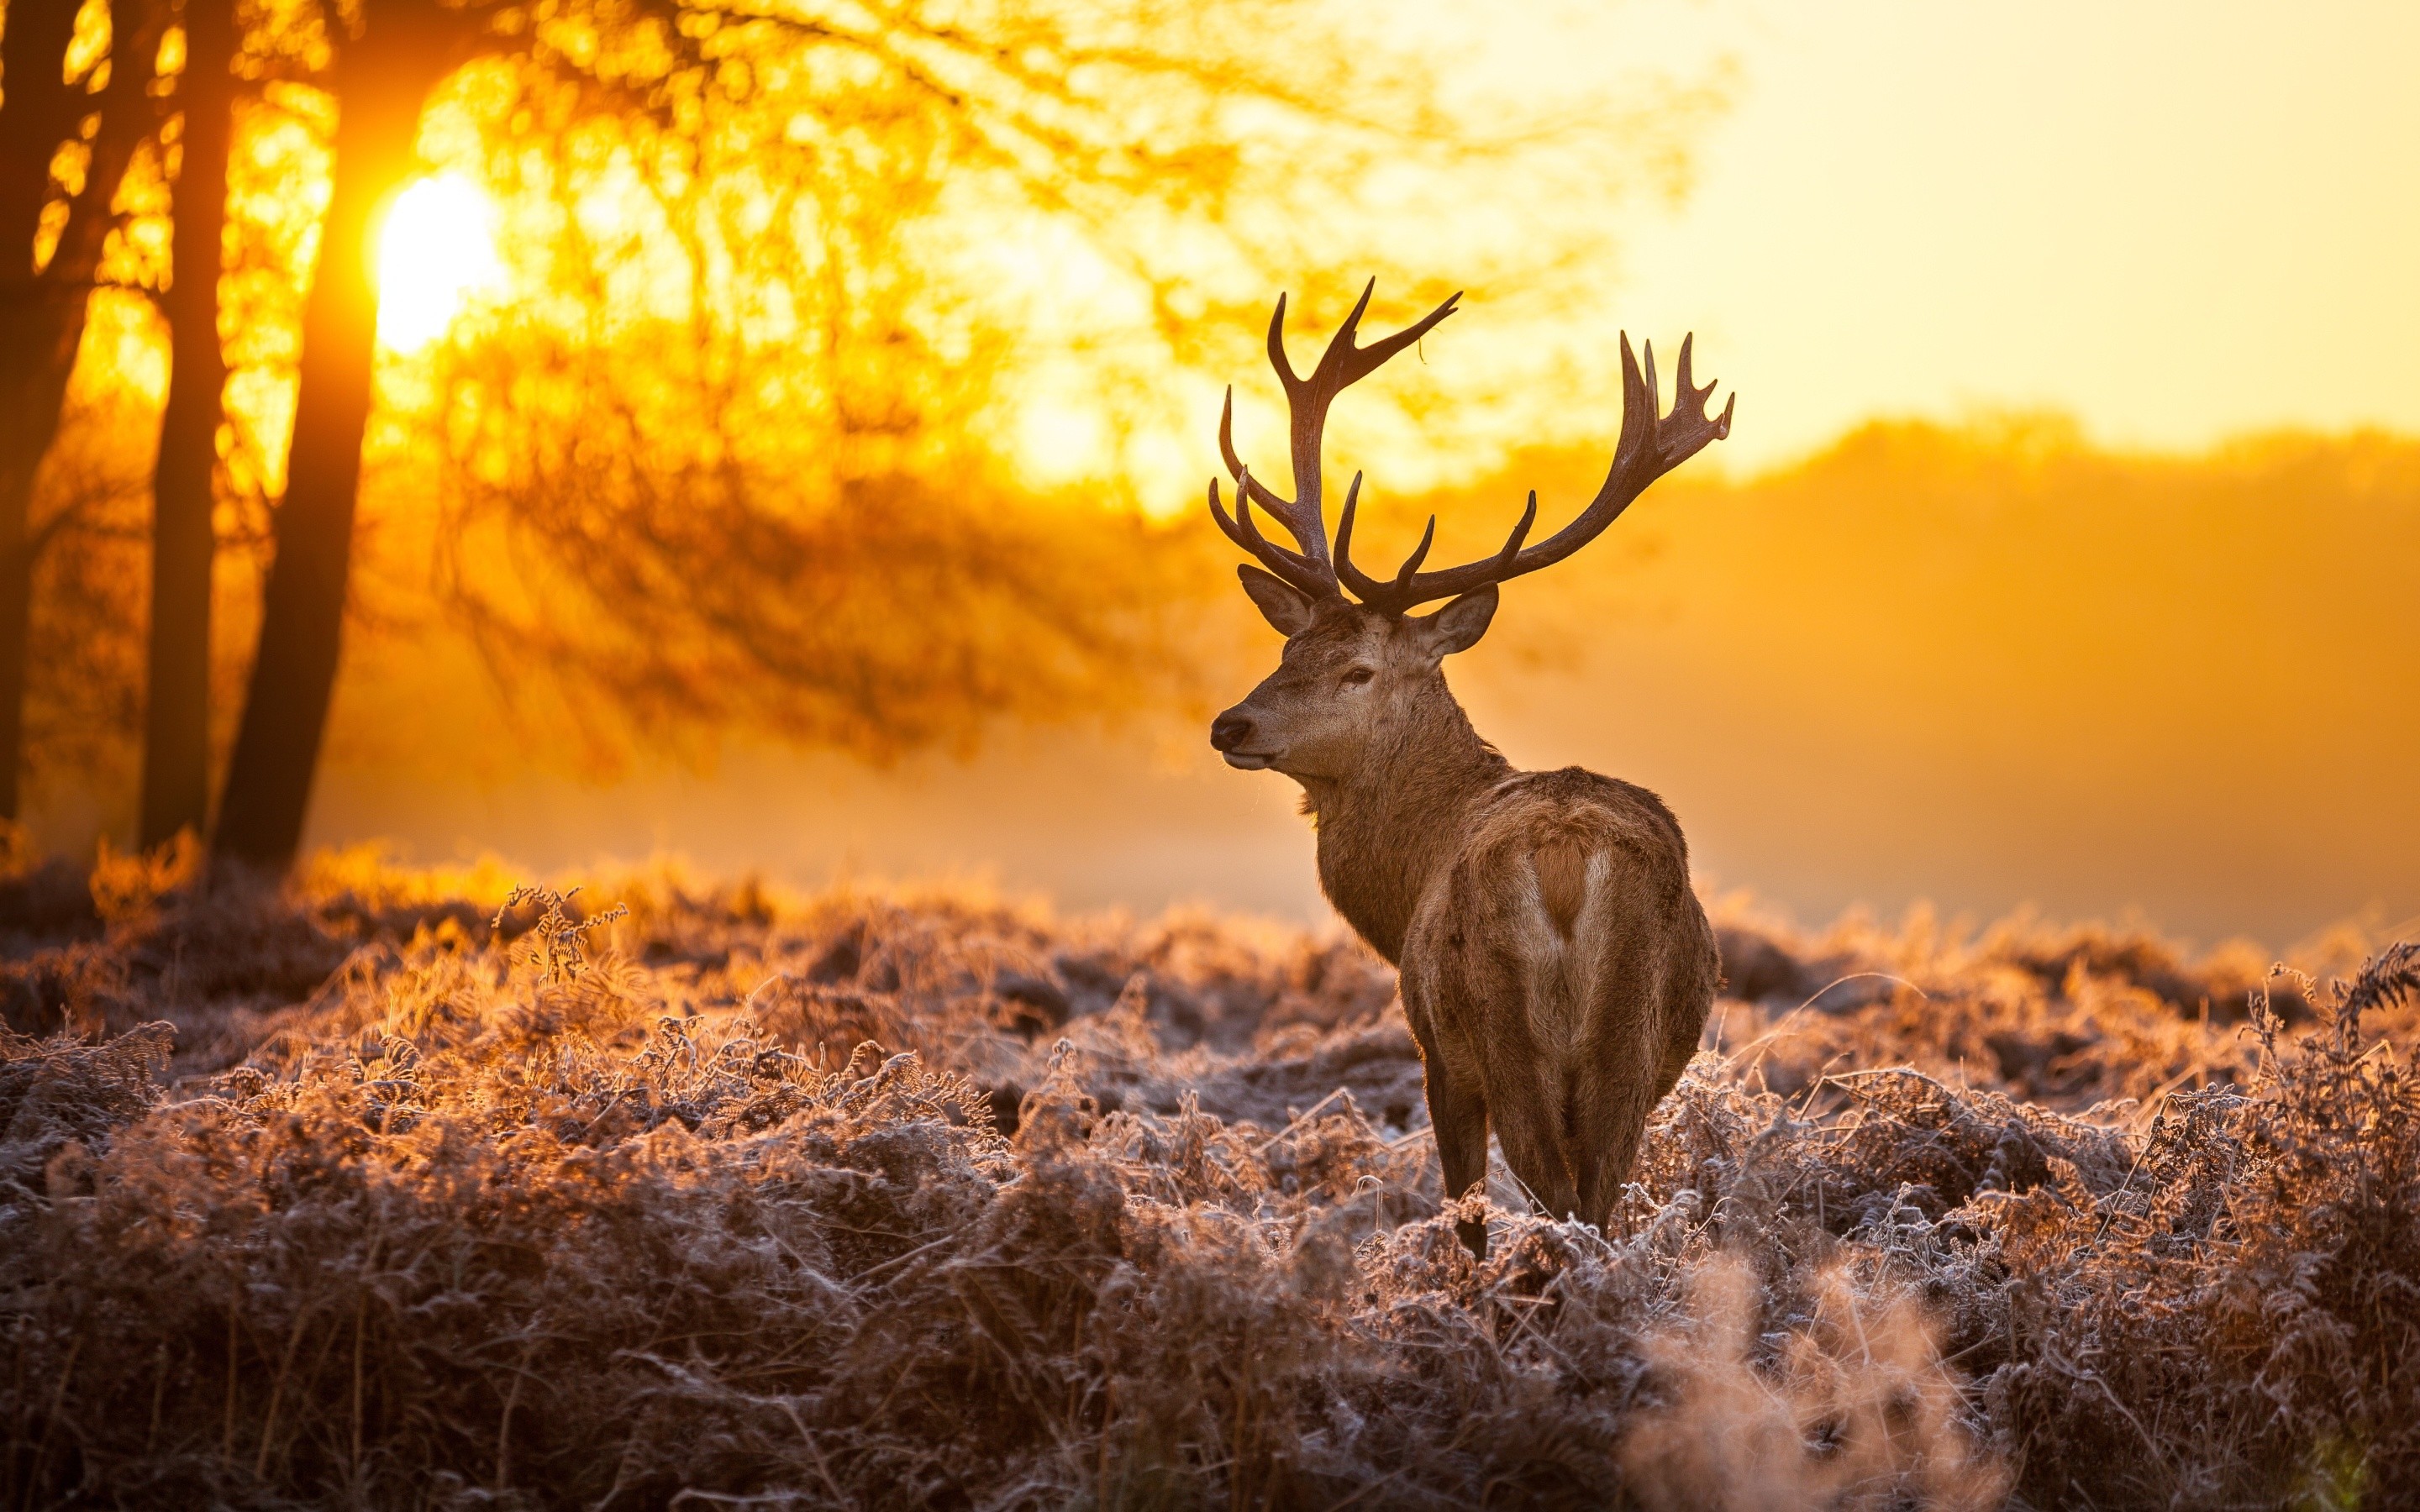 Gallery For e Deer Wallpapers HD Wallpapers Pinterest Deer pics, Deer wallpaper and Wallpaper